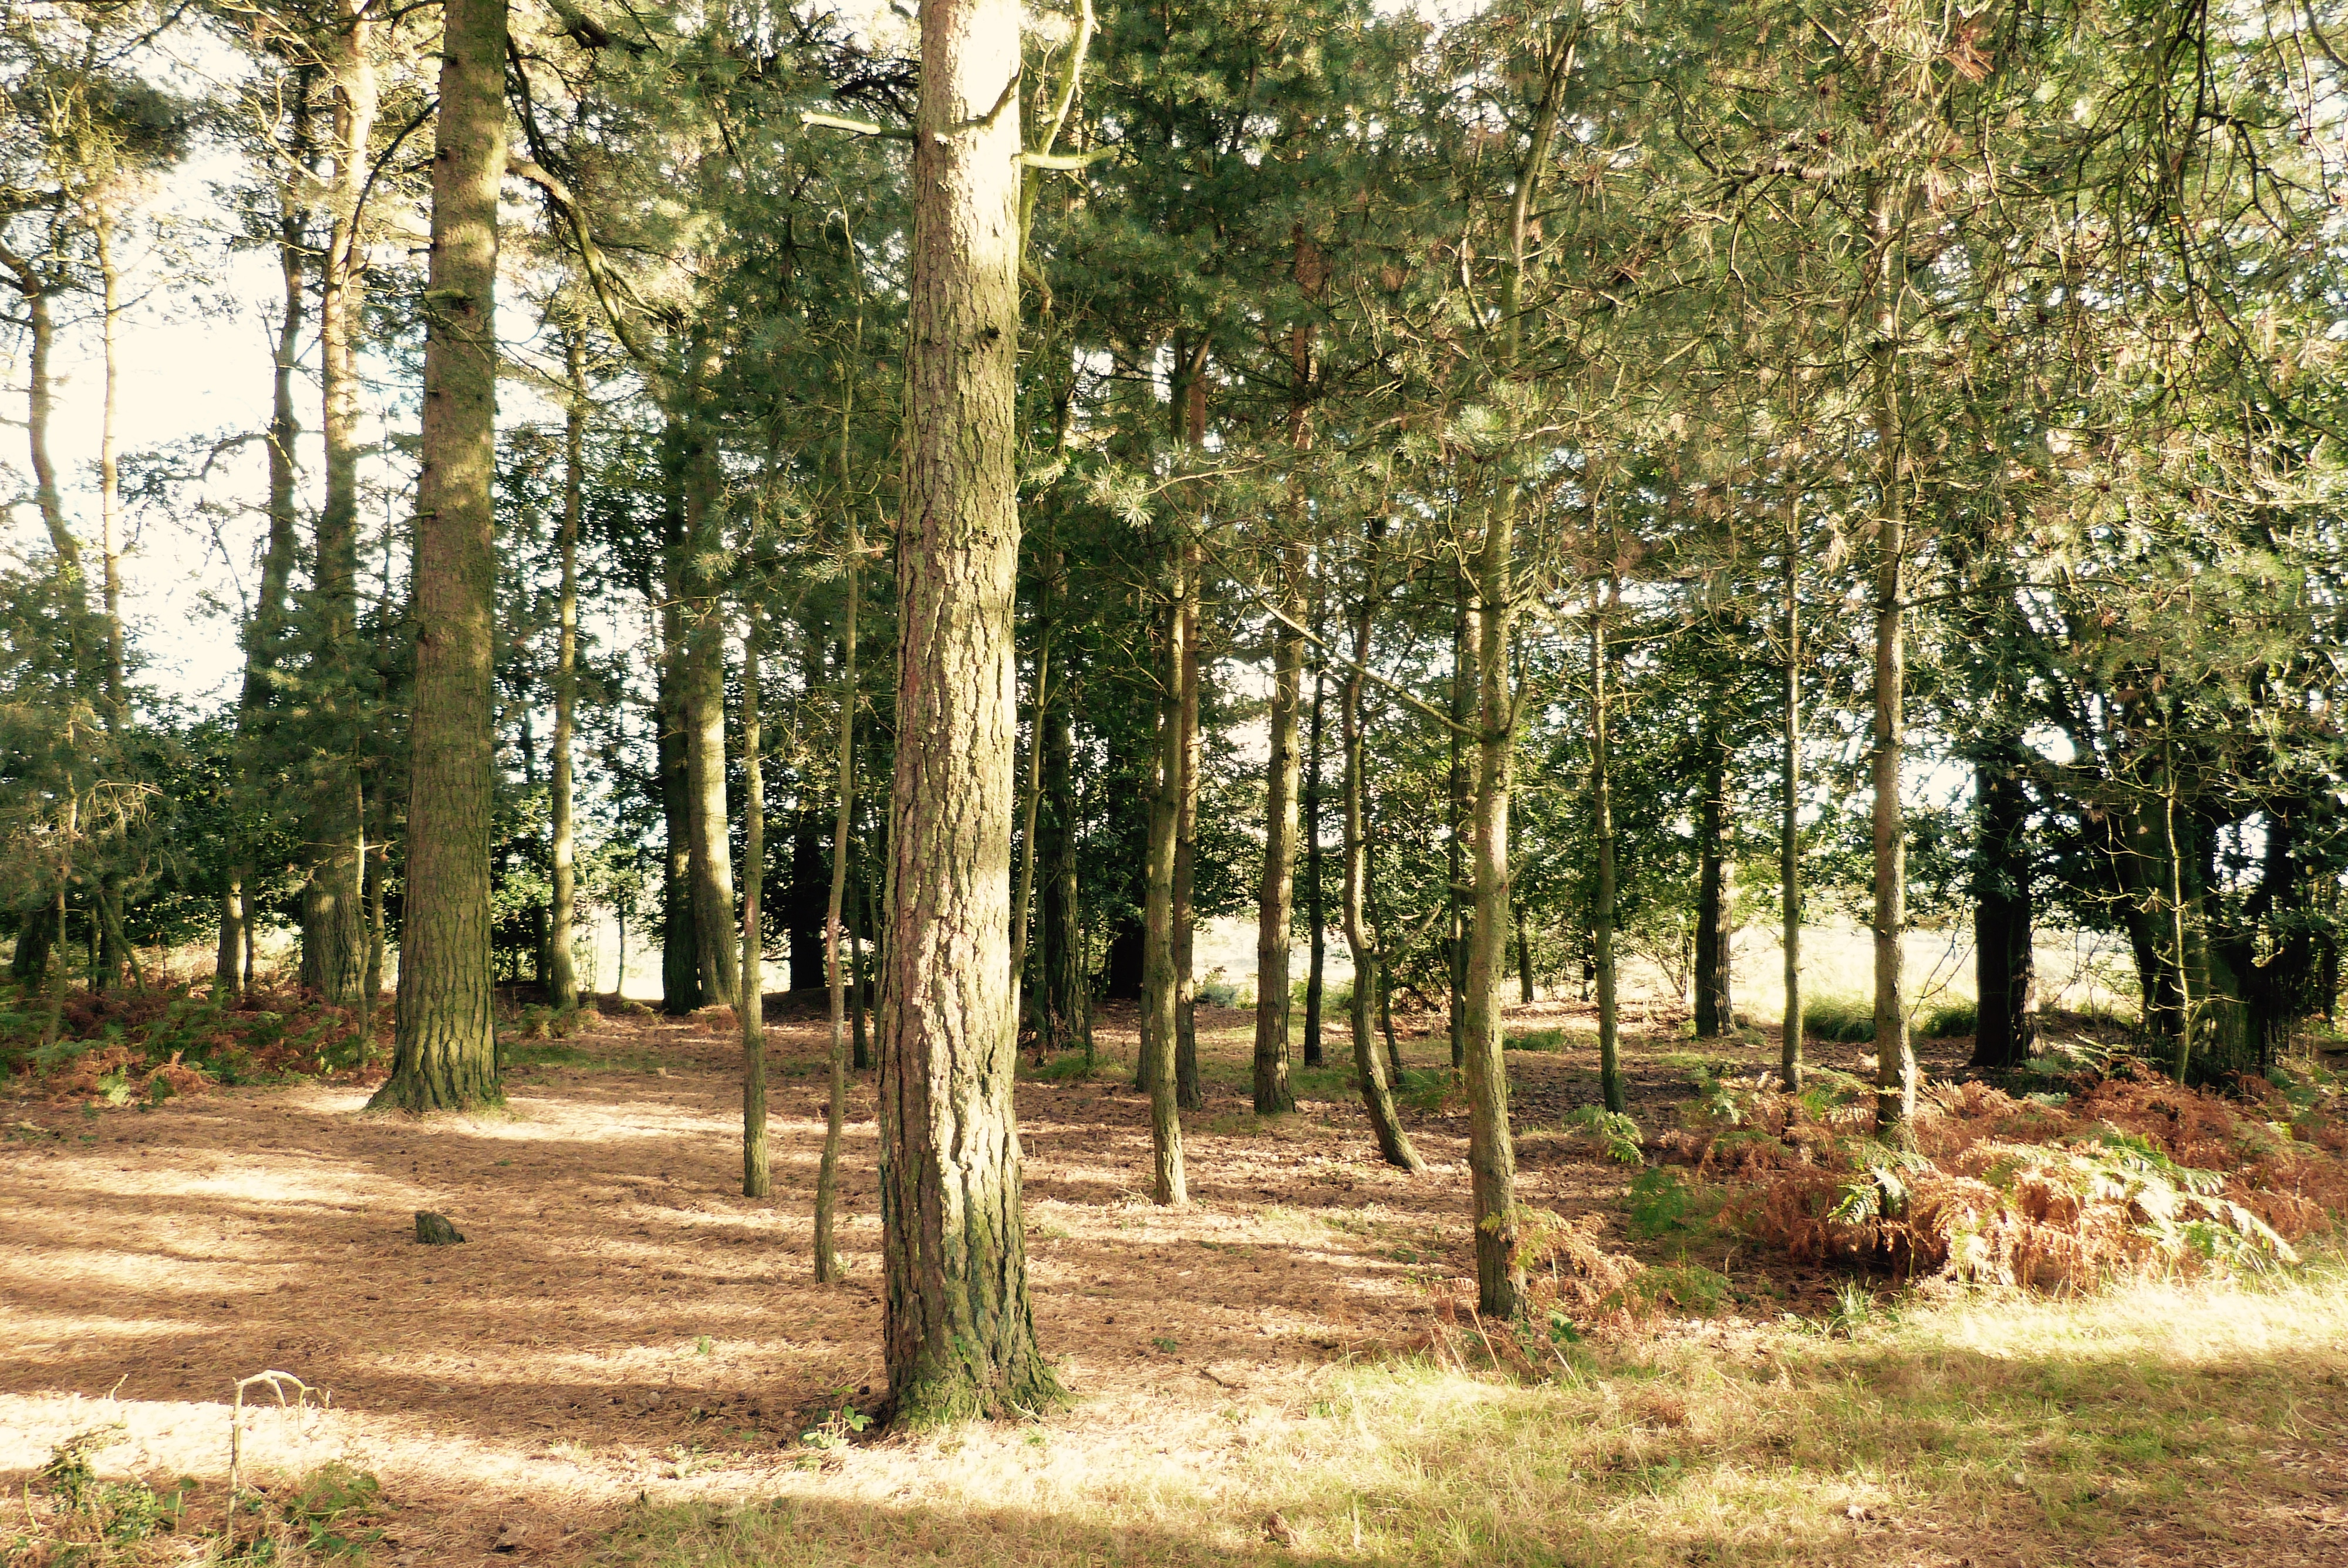 A view inside Ashdown Forest on Oct. 10 2016, which inspired A. A. Milne’s Enchanted Forest in <i>Winnie the Pooh</i>. Christopher Robin believes it to be enchanted because no one can count whether there are 63 or 64 trees. (Kate Samuelson—TIME)